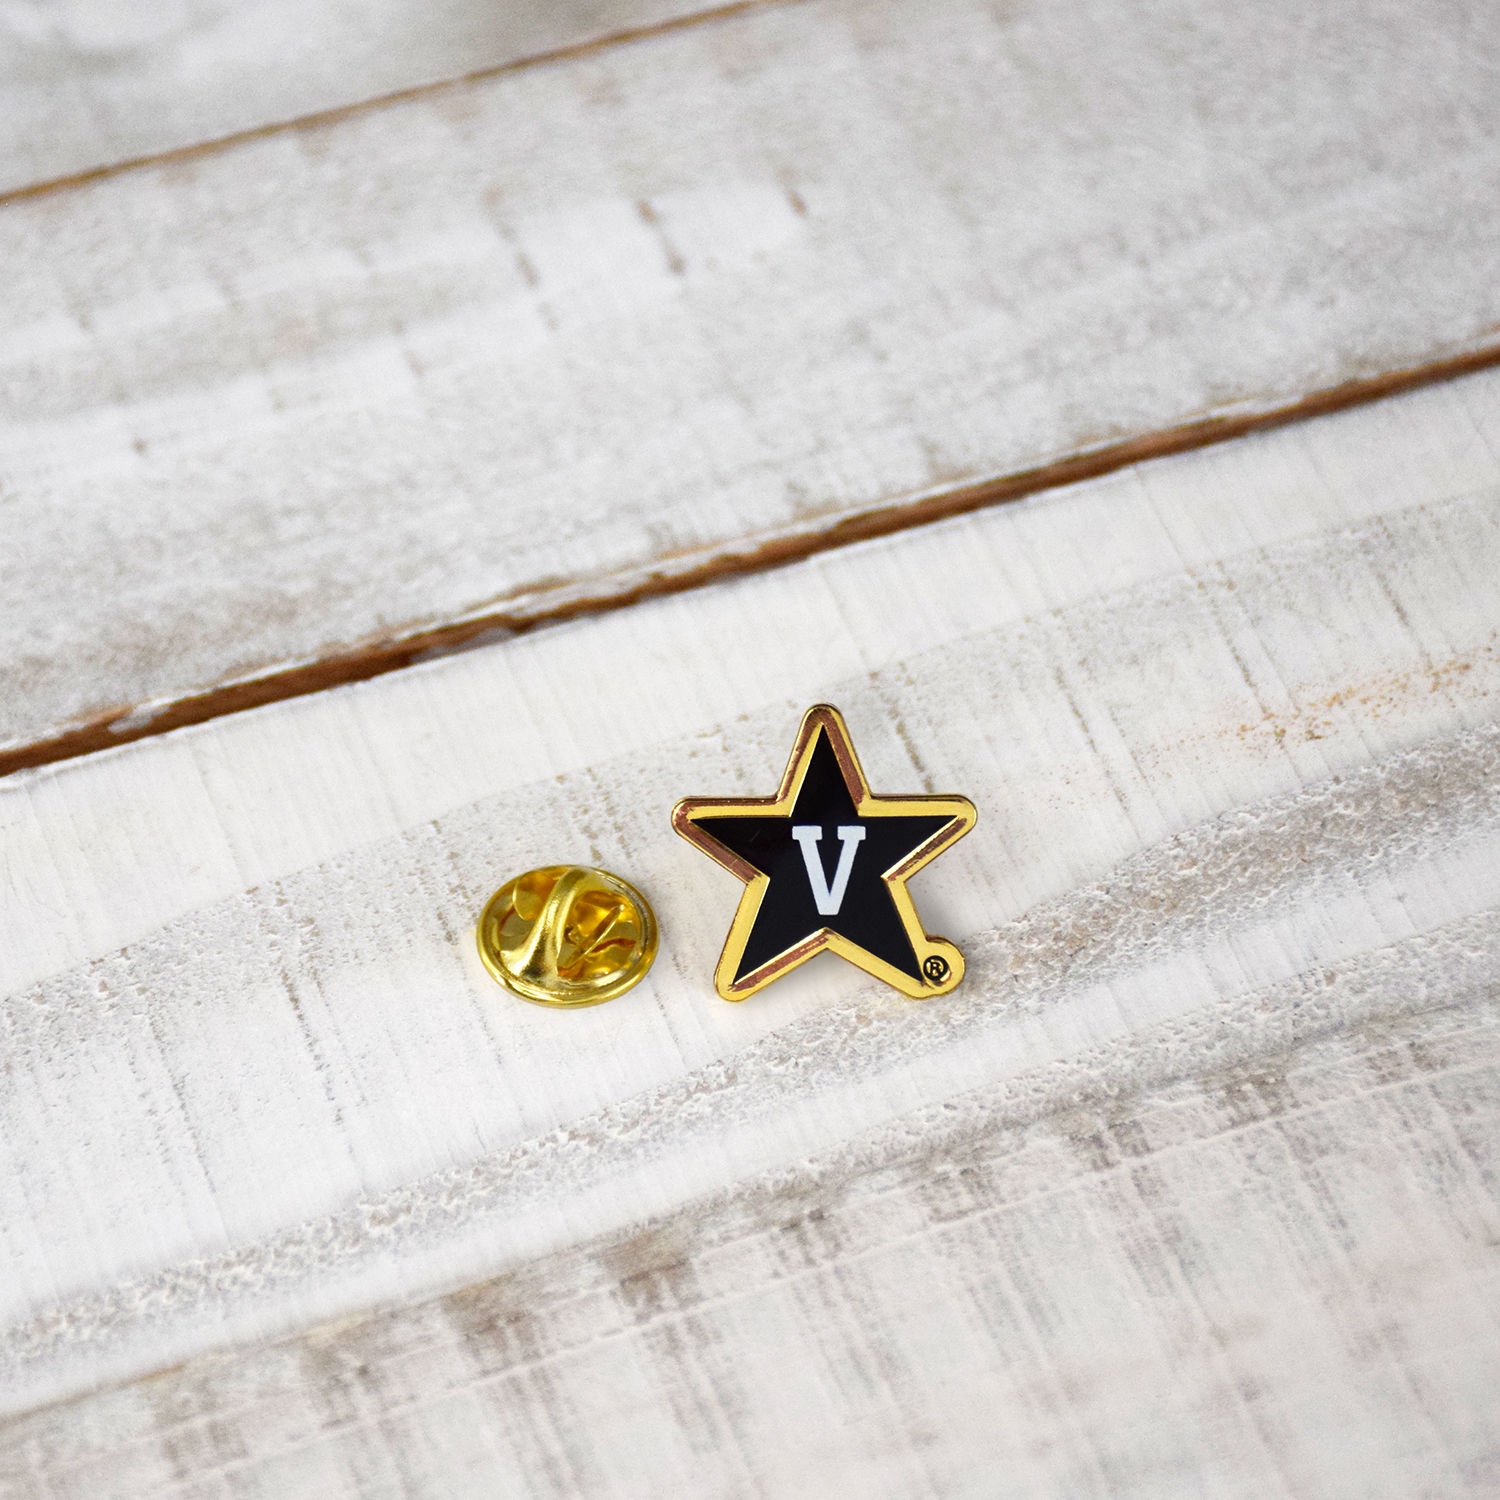 Vanderbilt University Commodores Gold Pin by Fan Frenzy Gifts - image 1 of 4